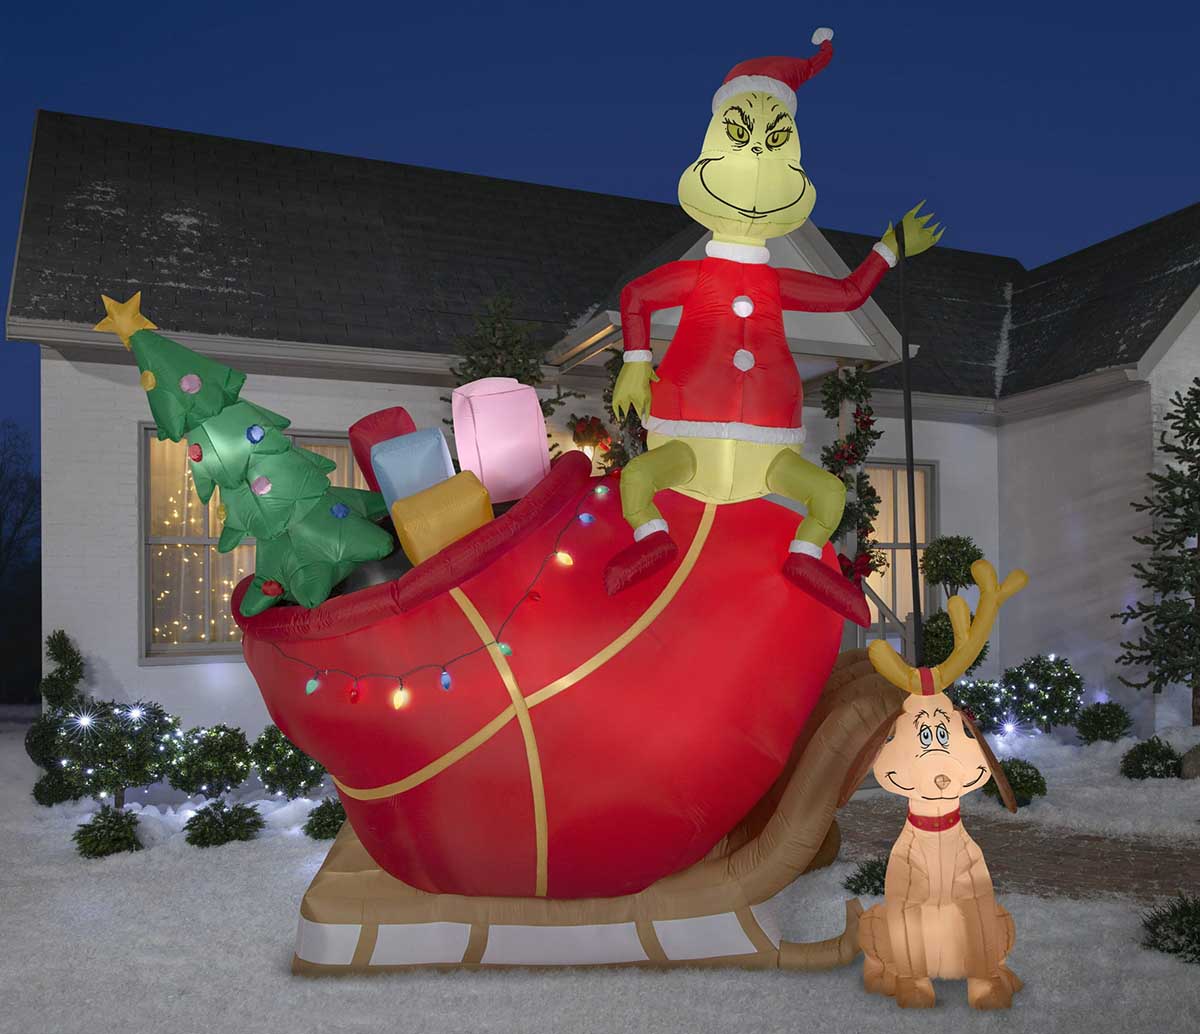 The Best Christmas Inflatables Option Gemmy Christmas Inflatable Grinch and Max in Sleigh